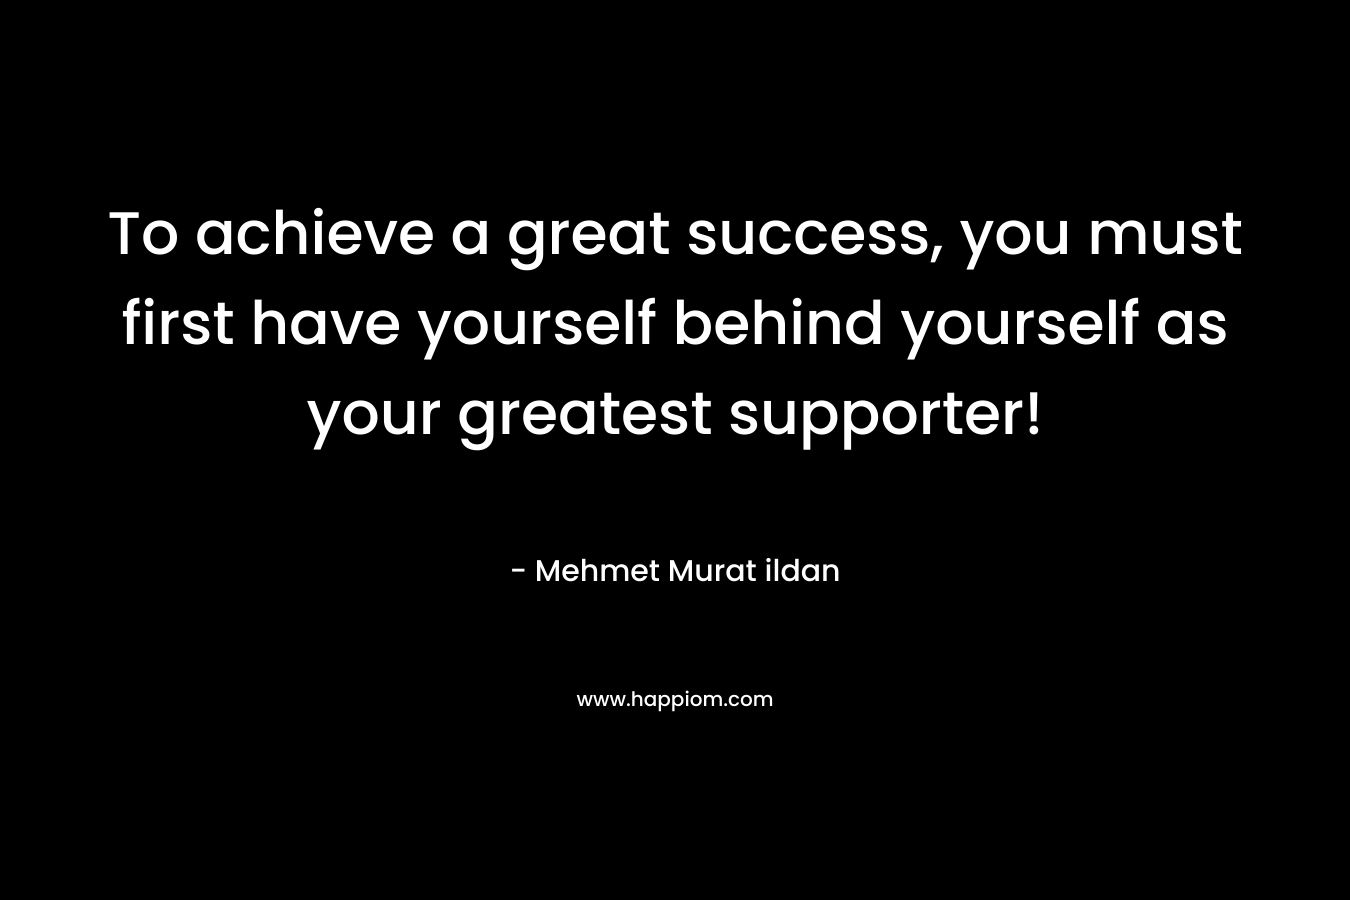 To achieve a great success, you must first have yourself behind yourself as your greatest supporter!